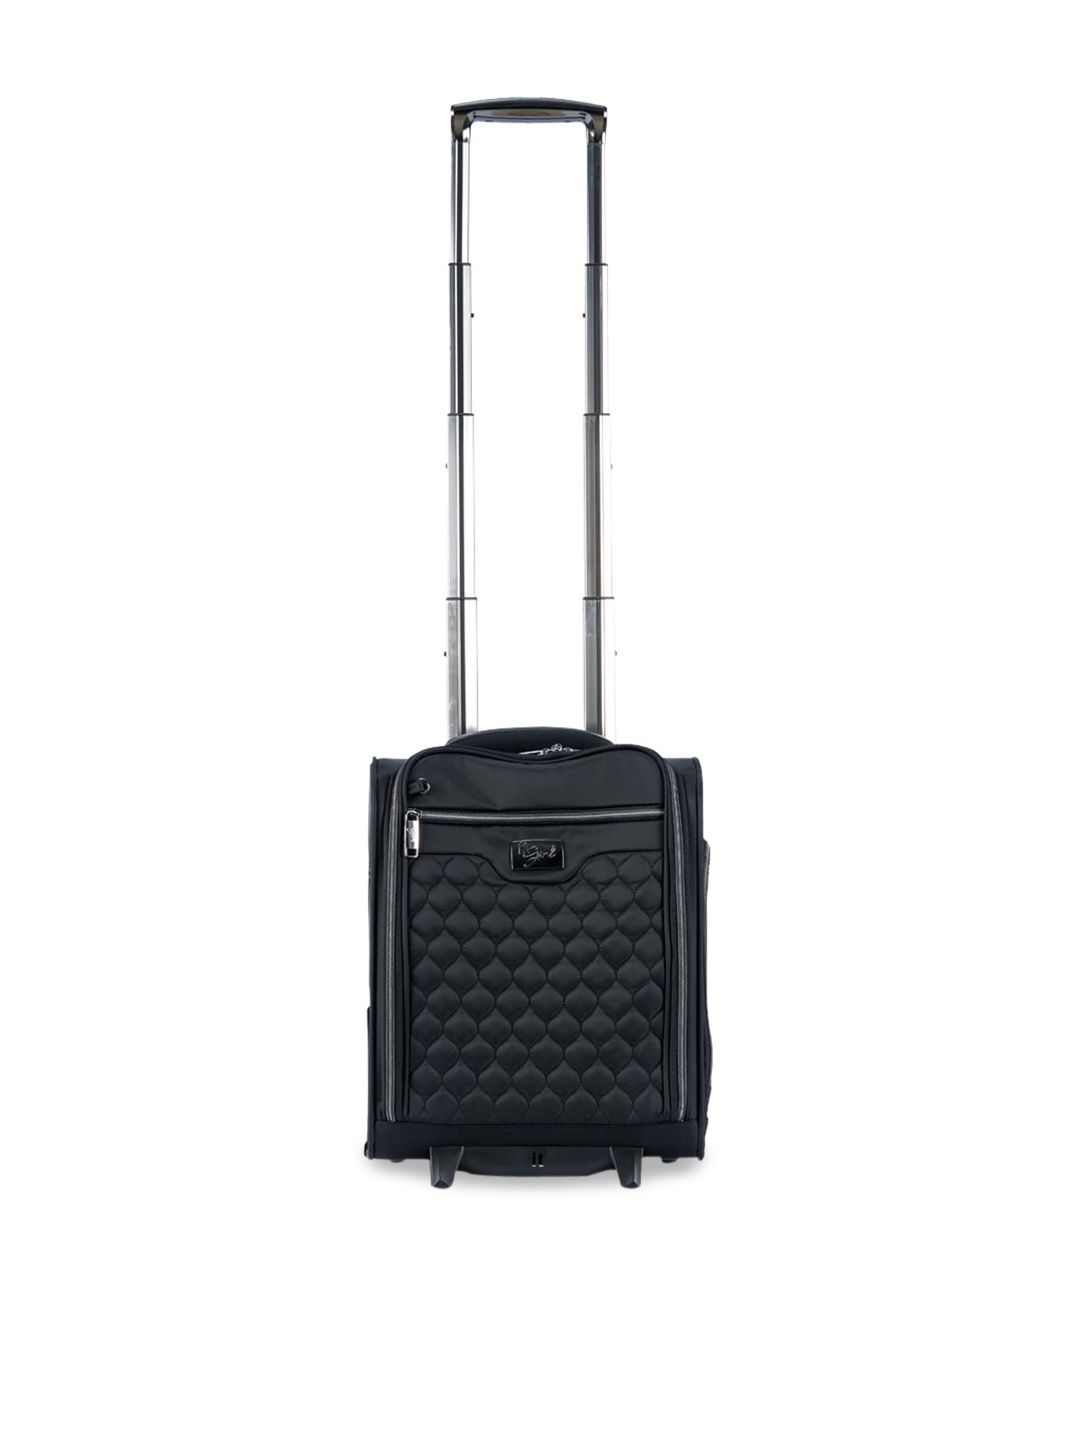 IT luggage Black Self Designed Soft Sided Cabin 25% Expandable 8 Wheel Trolley Suitcase Price in India